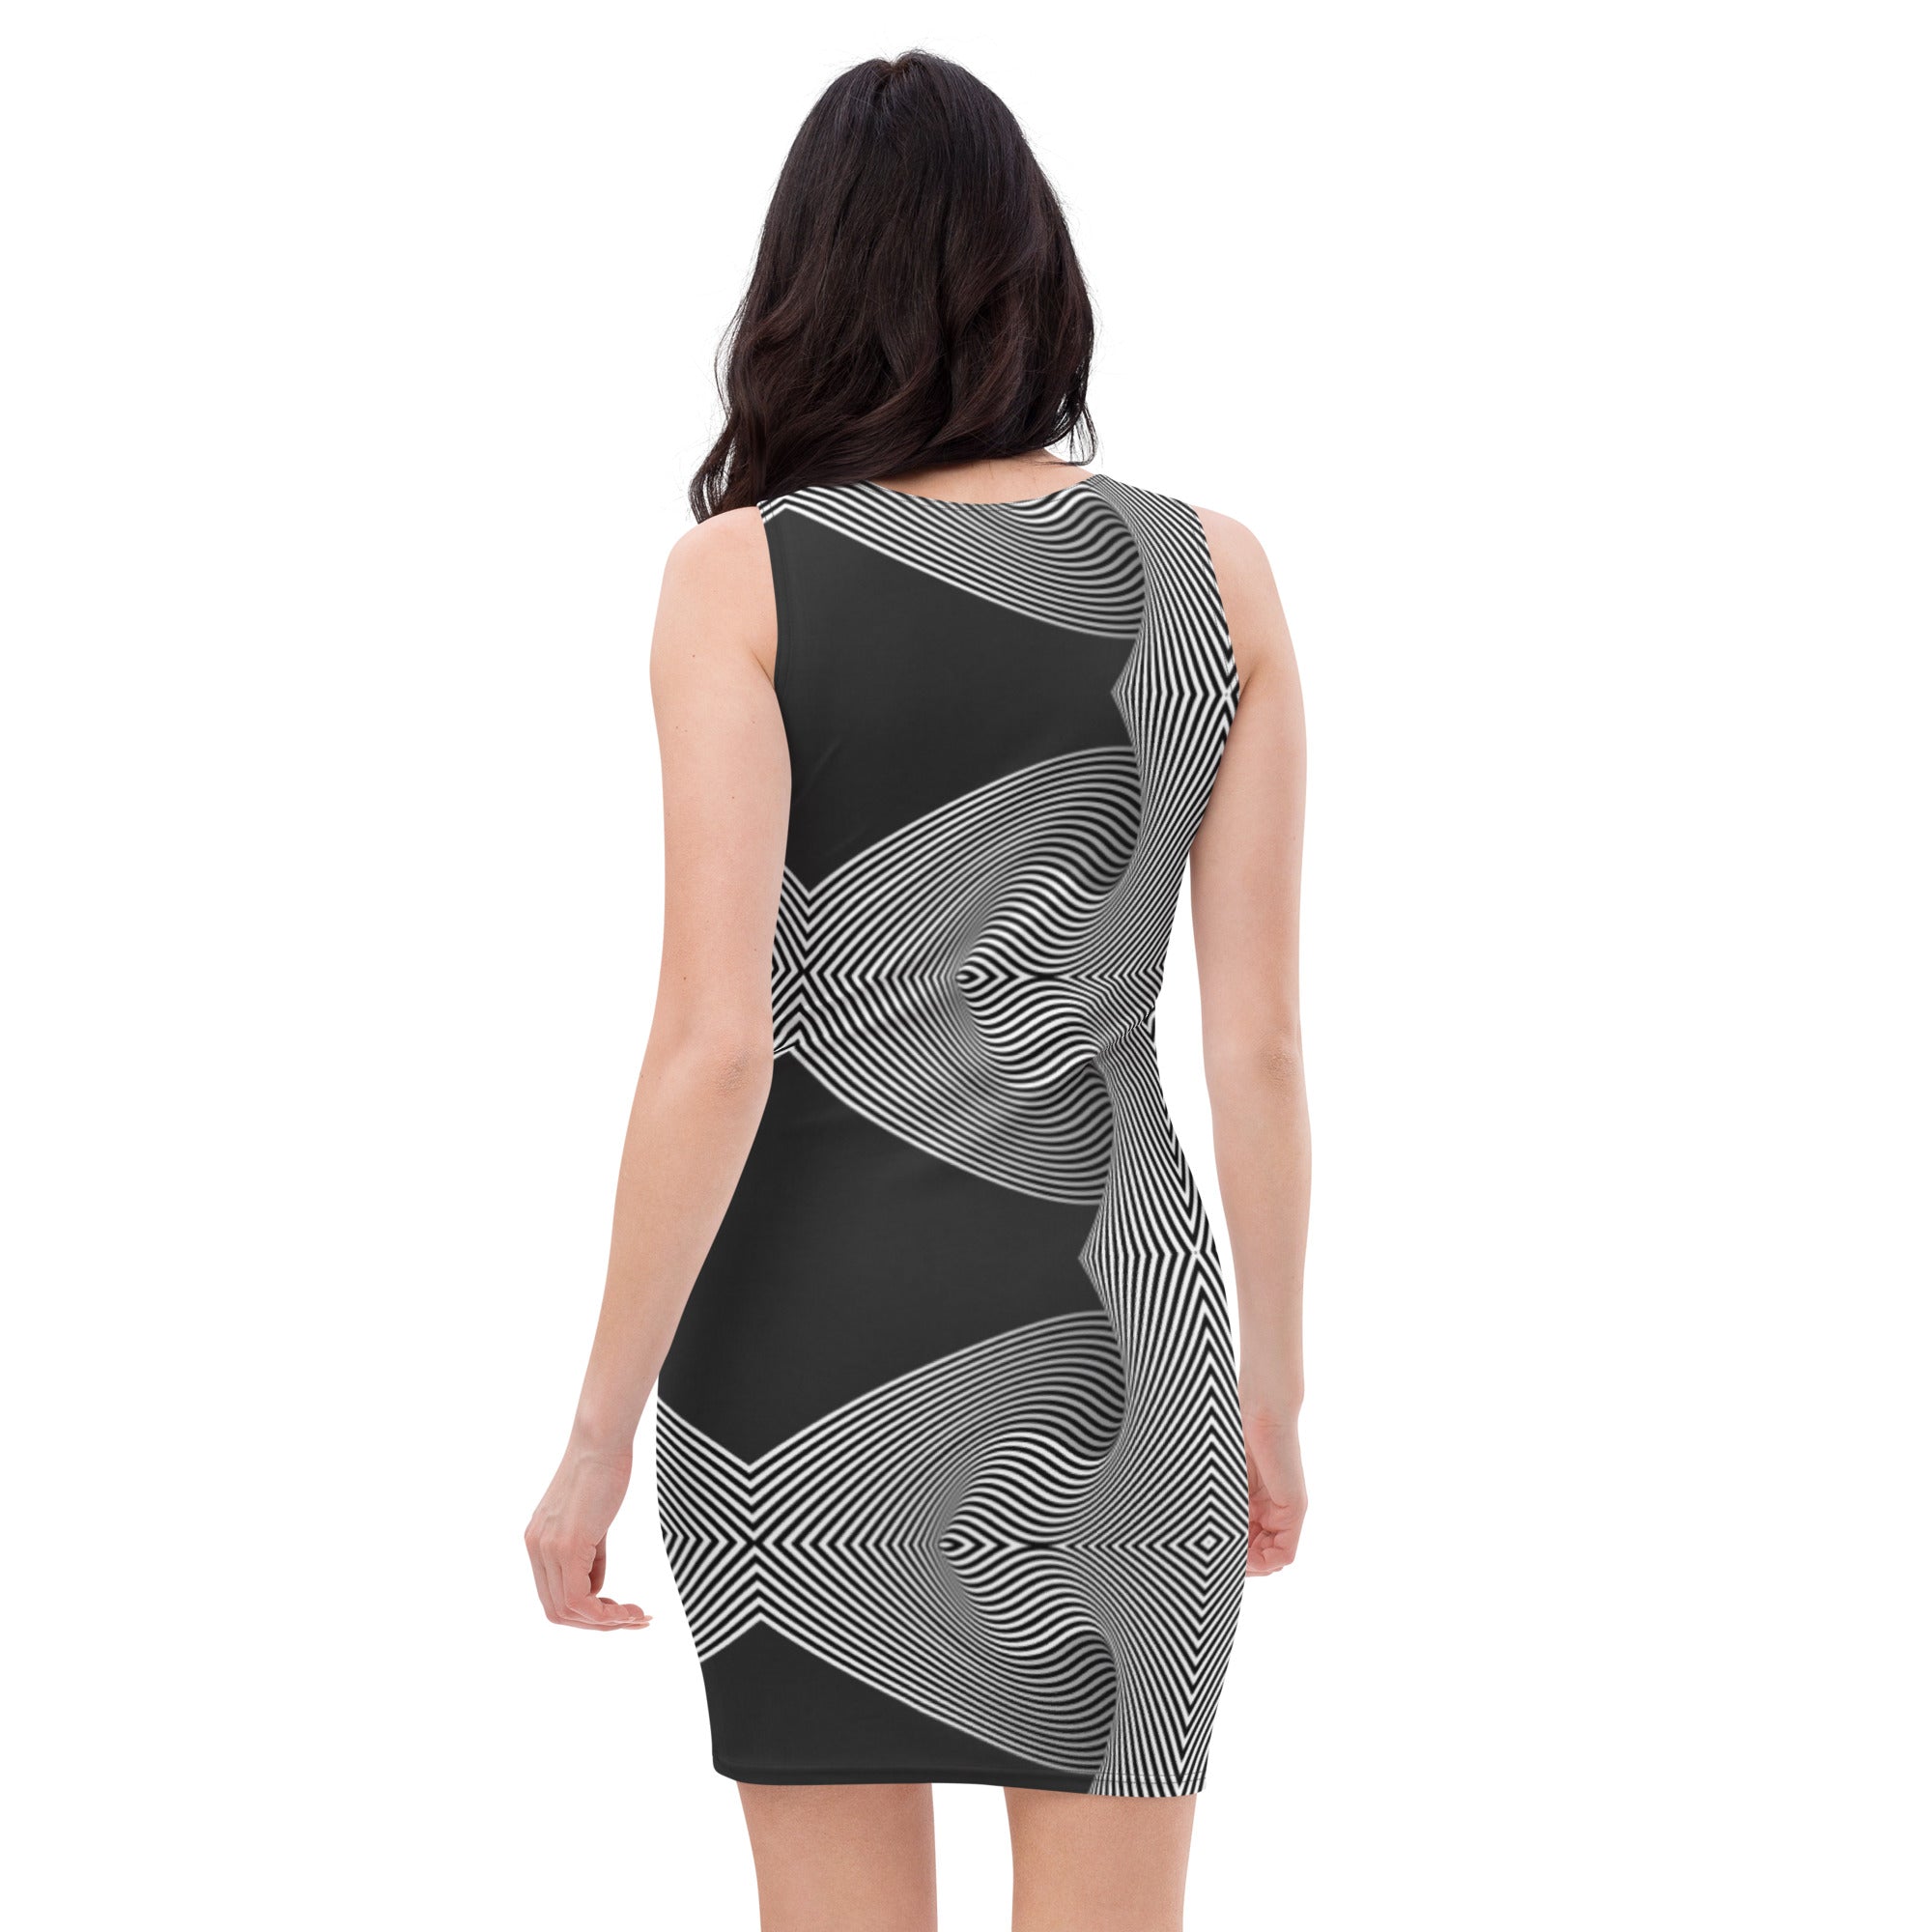 Black and White Curves, Exclusive designed fitted Sublimation Cut & Sew Dress, by Sensus Studio Design